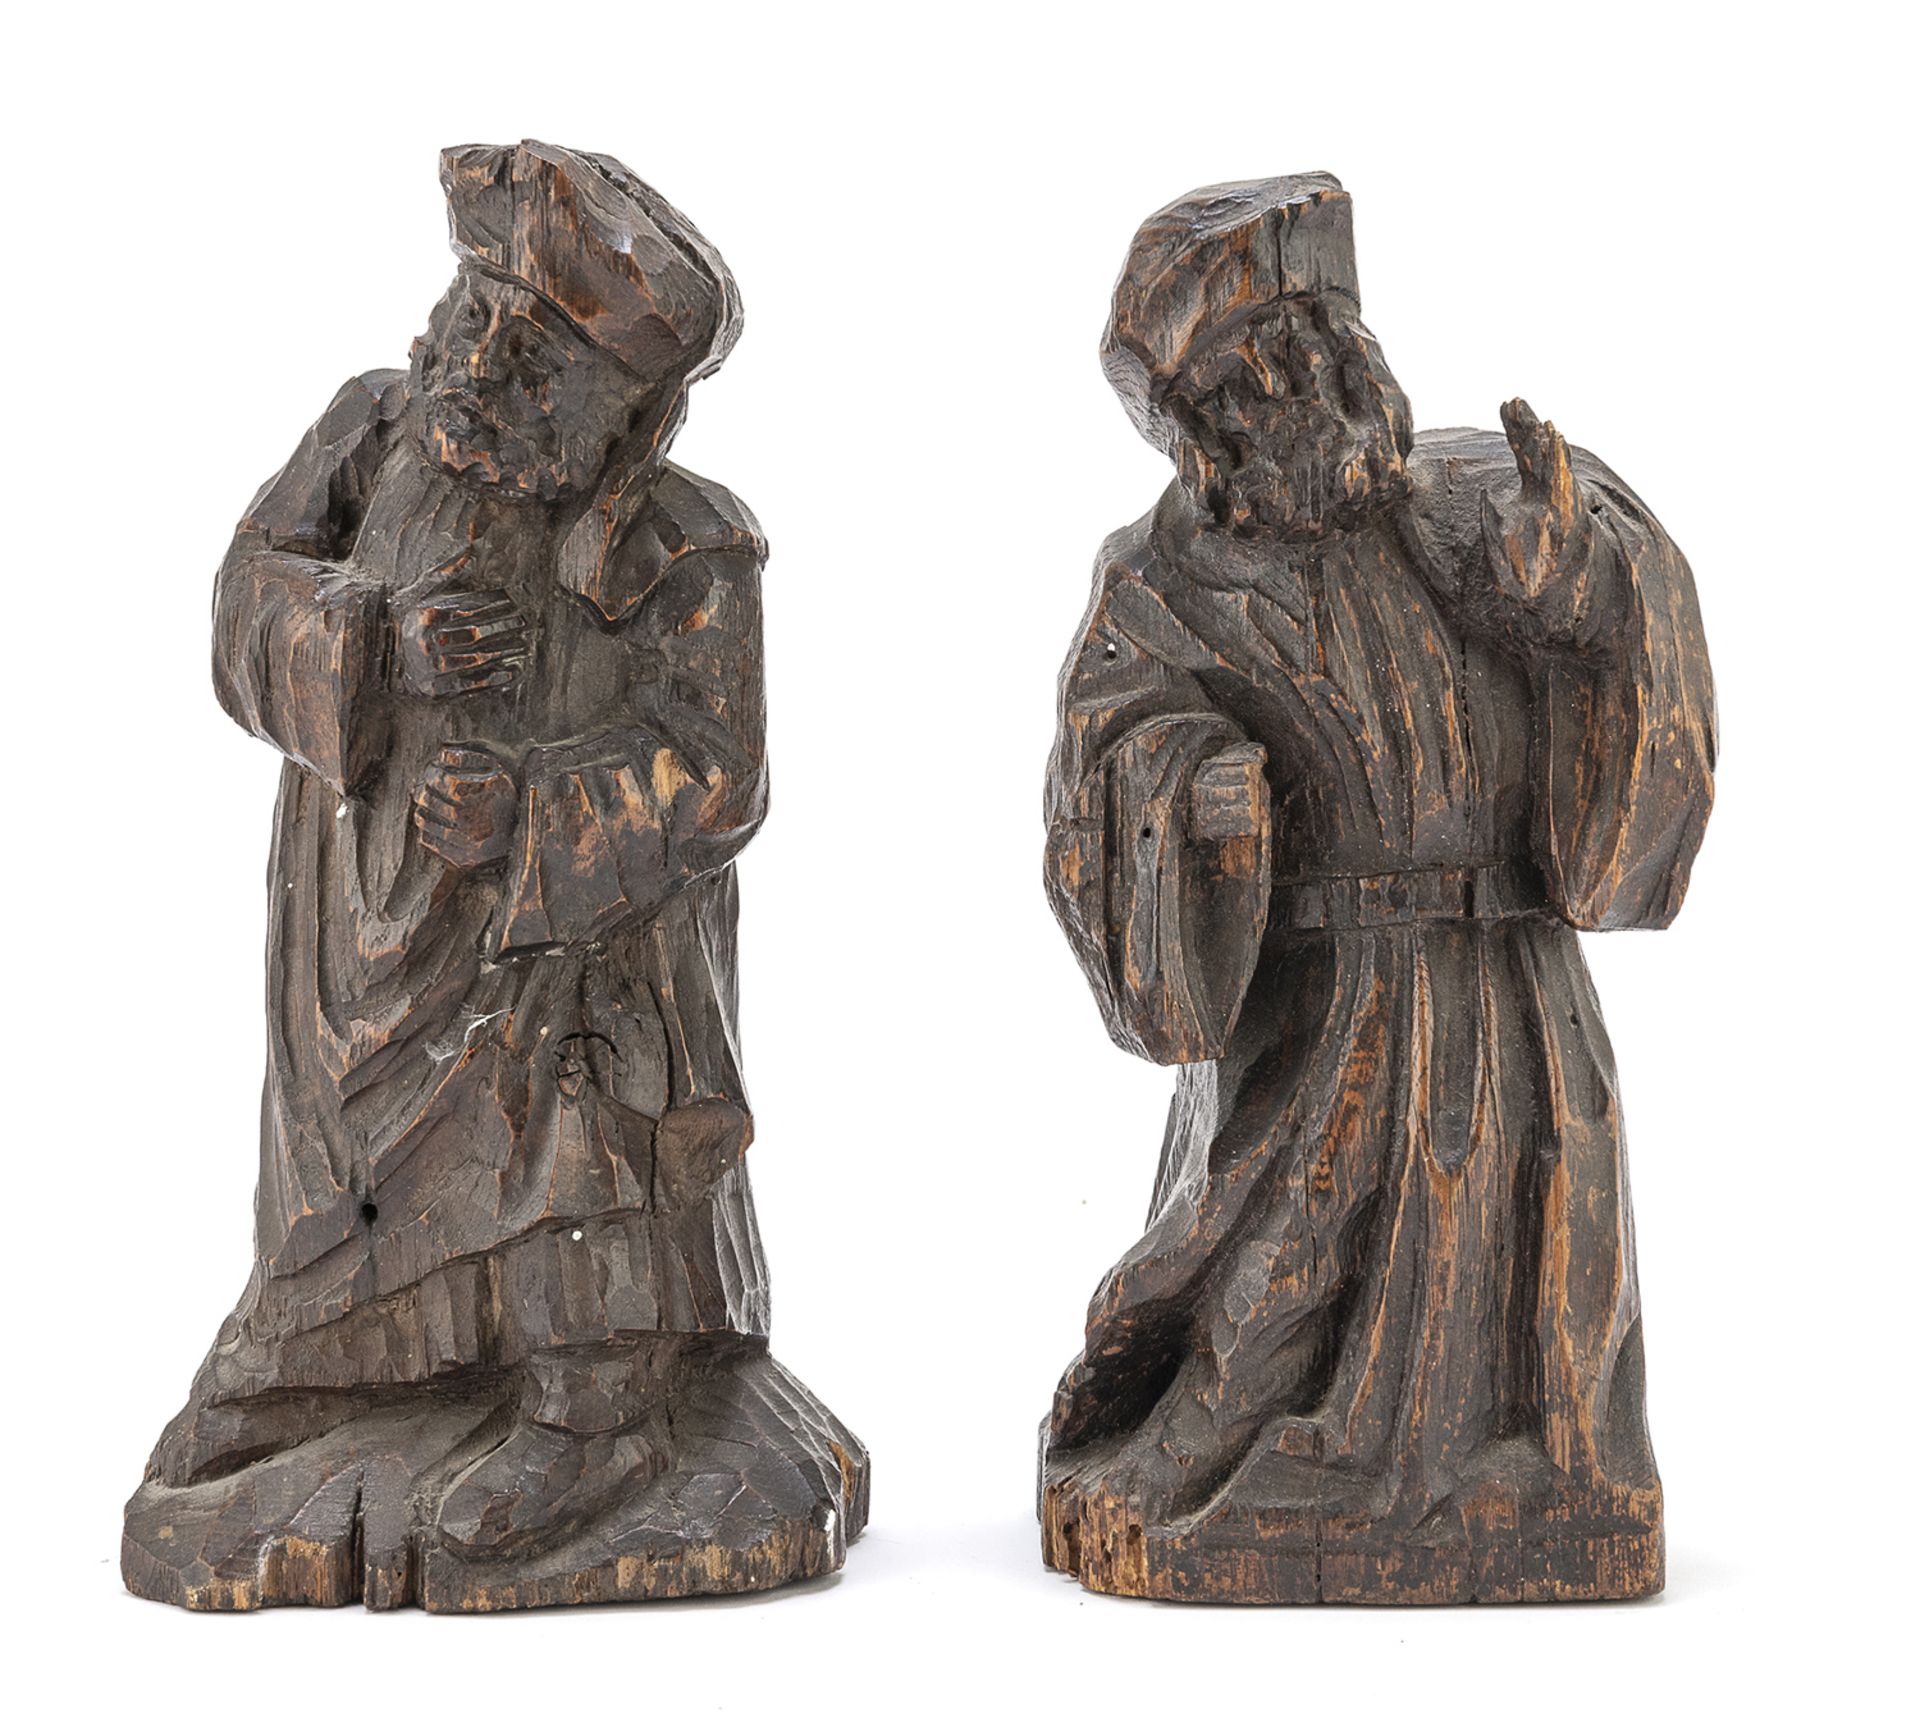 PAIR OF WOOD SCULPTURES PROBABLY 17th CENTURY GERMANY